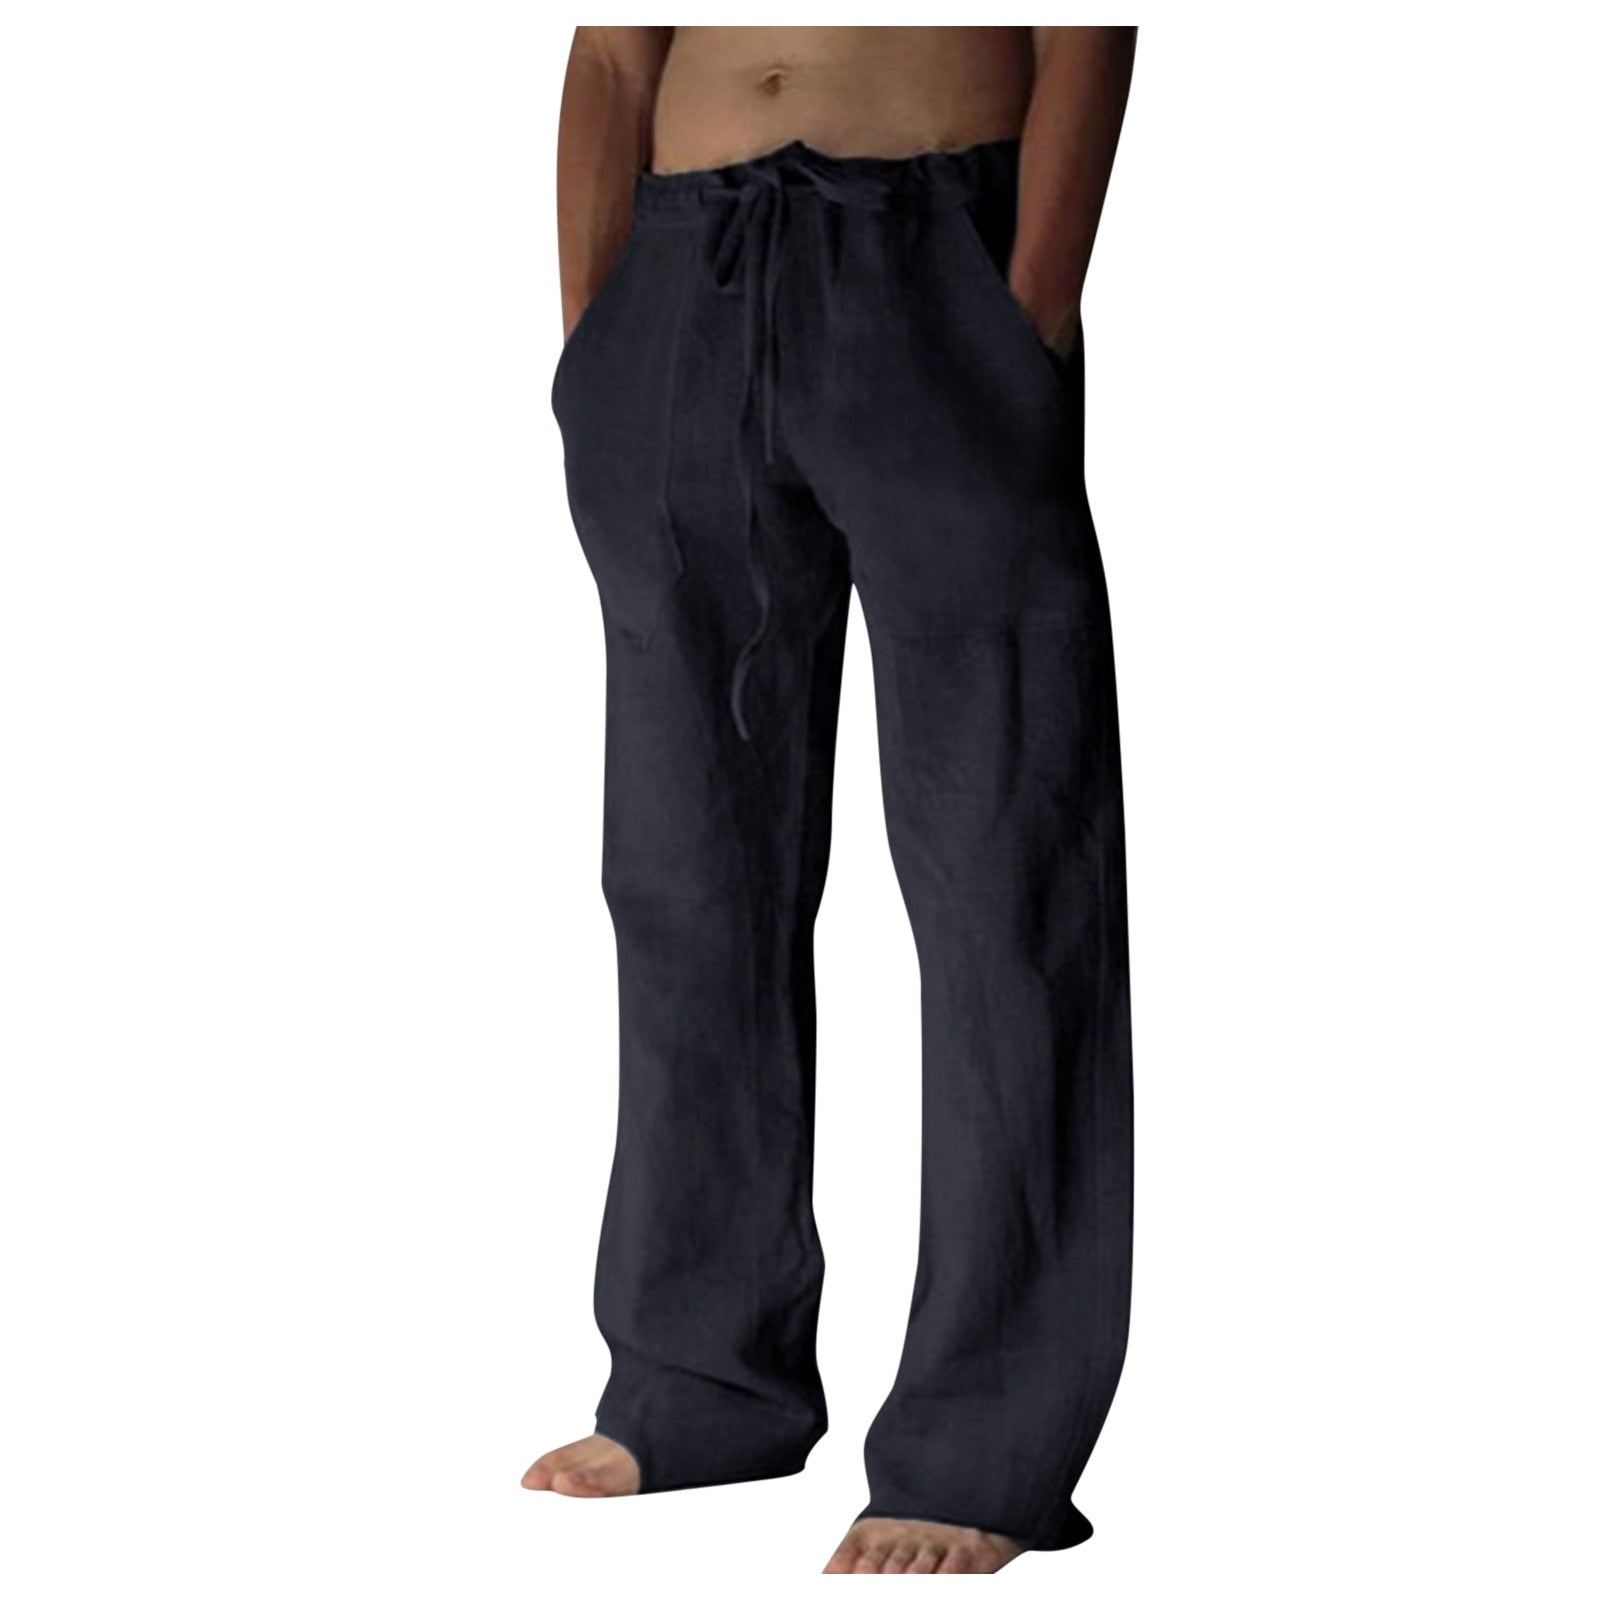 VIKING MENS TROUSERS – Forged in Valhalla